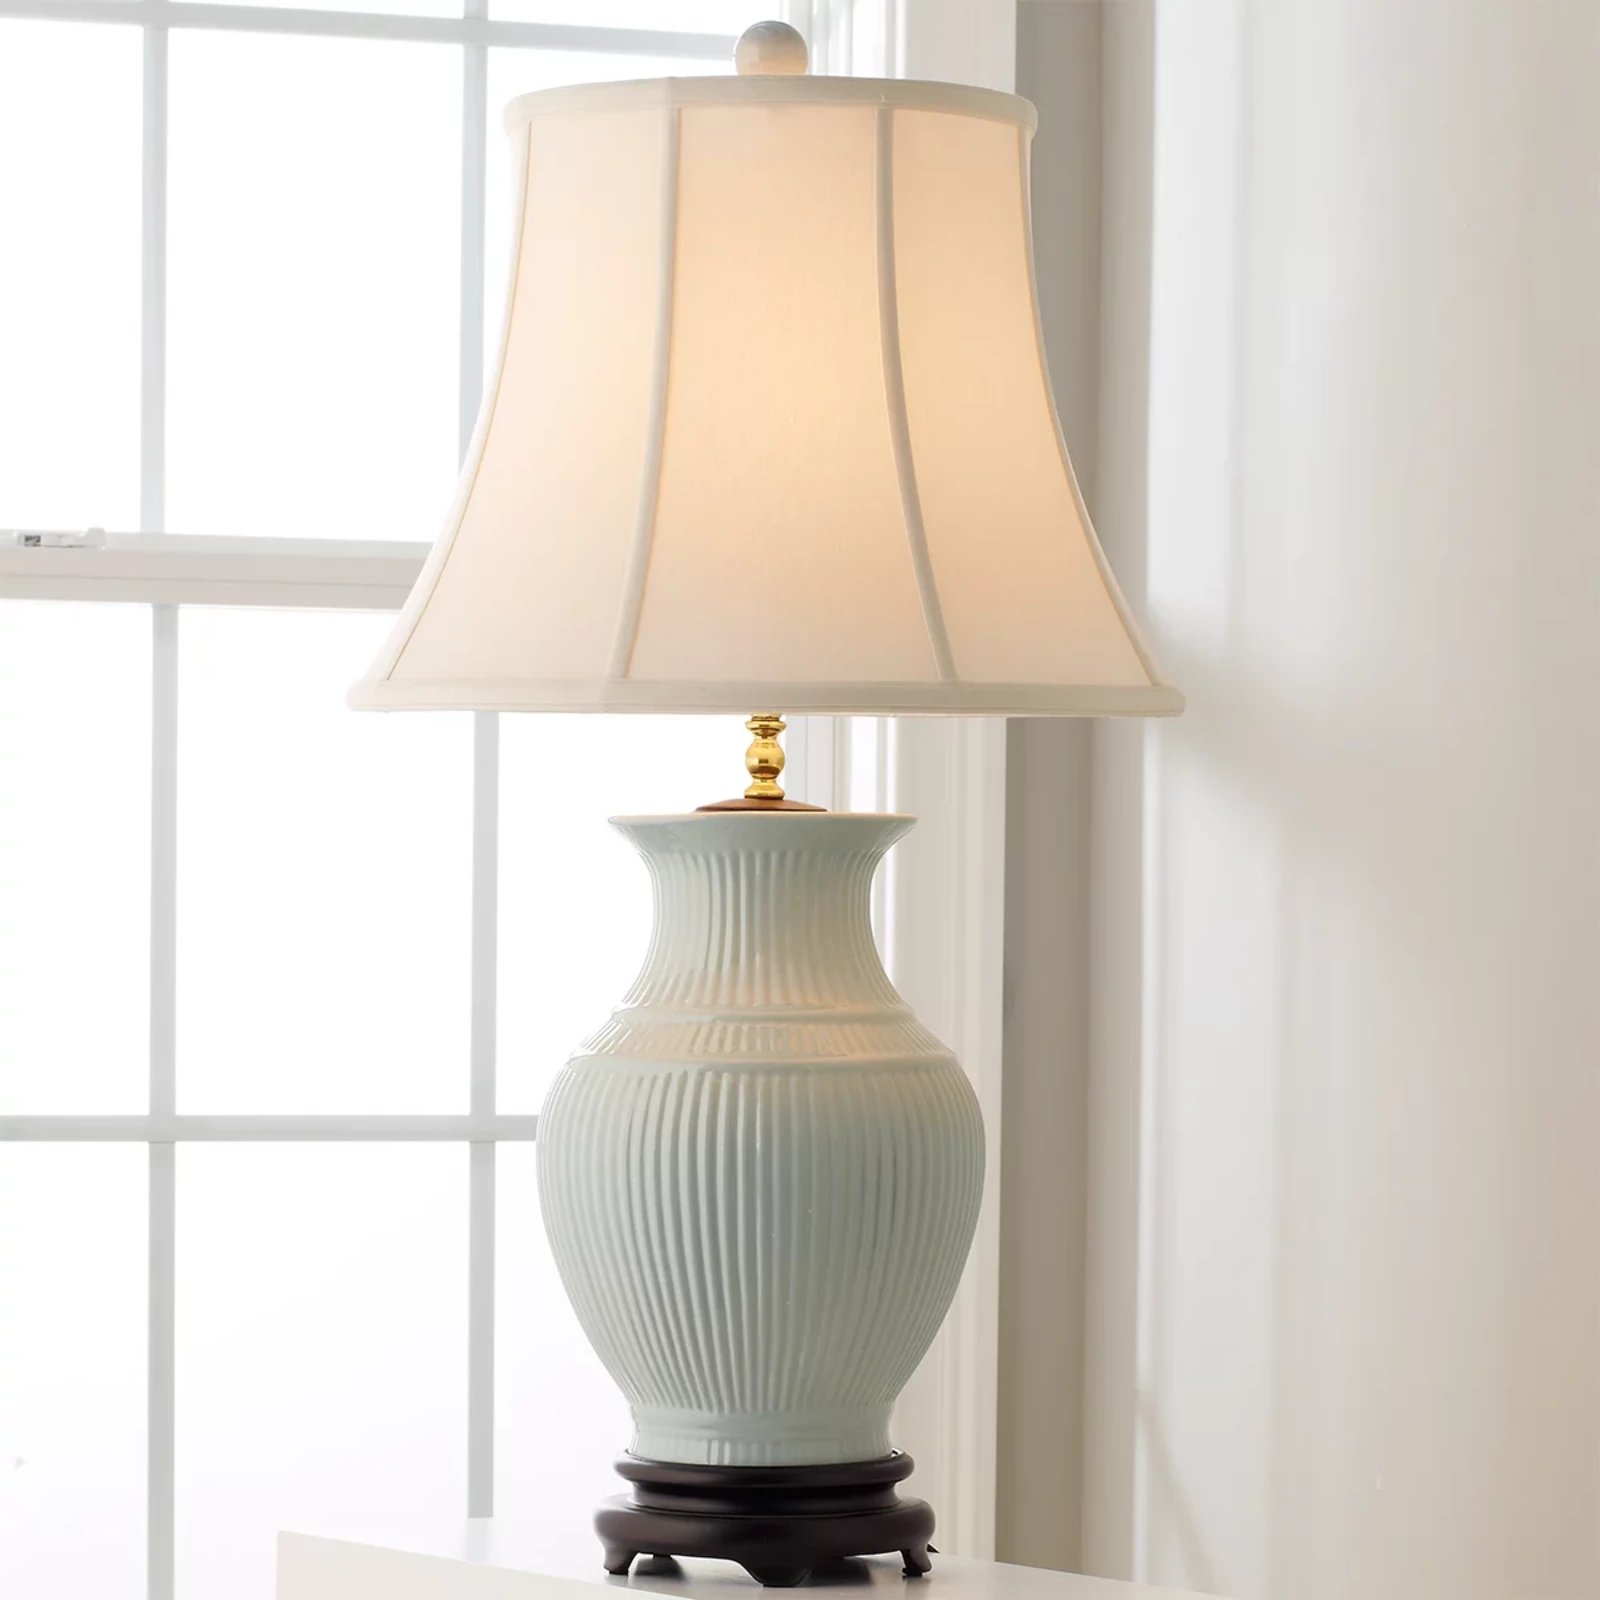 How To Make A Vase Into A Lamp